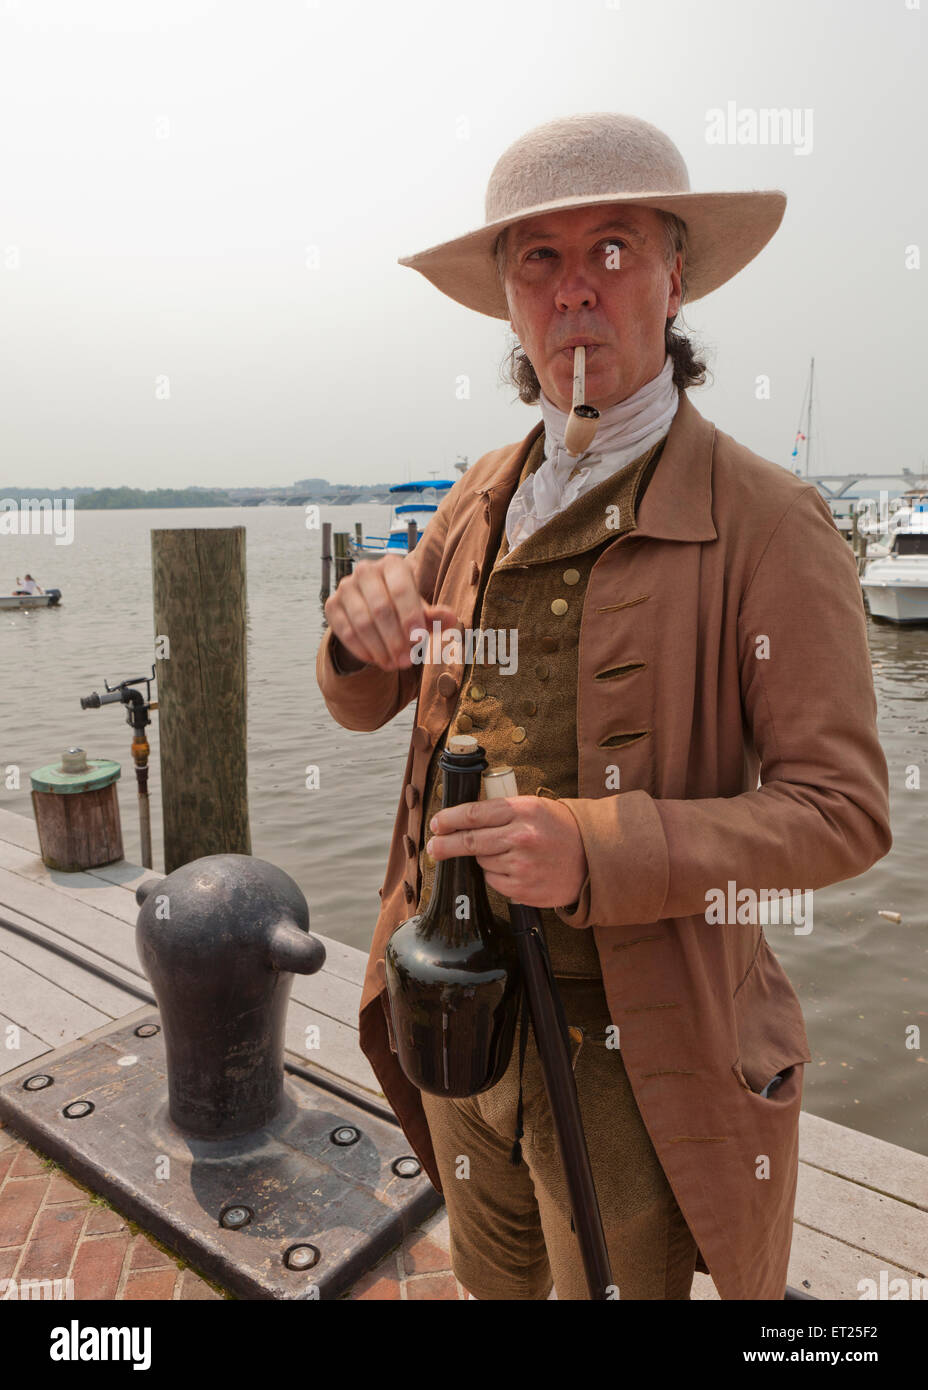 Gentleman wearing traditional clothing from the 17th century America - USA Stock Photo